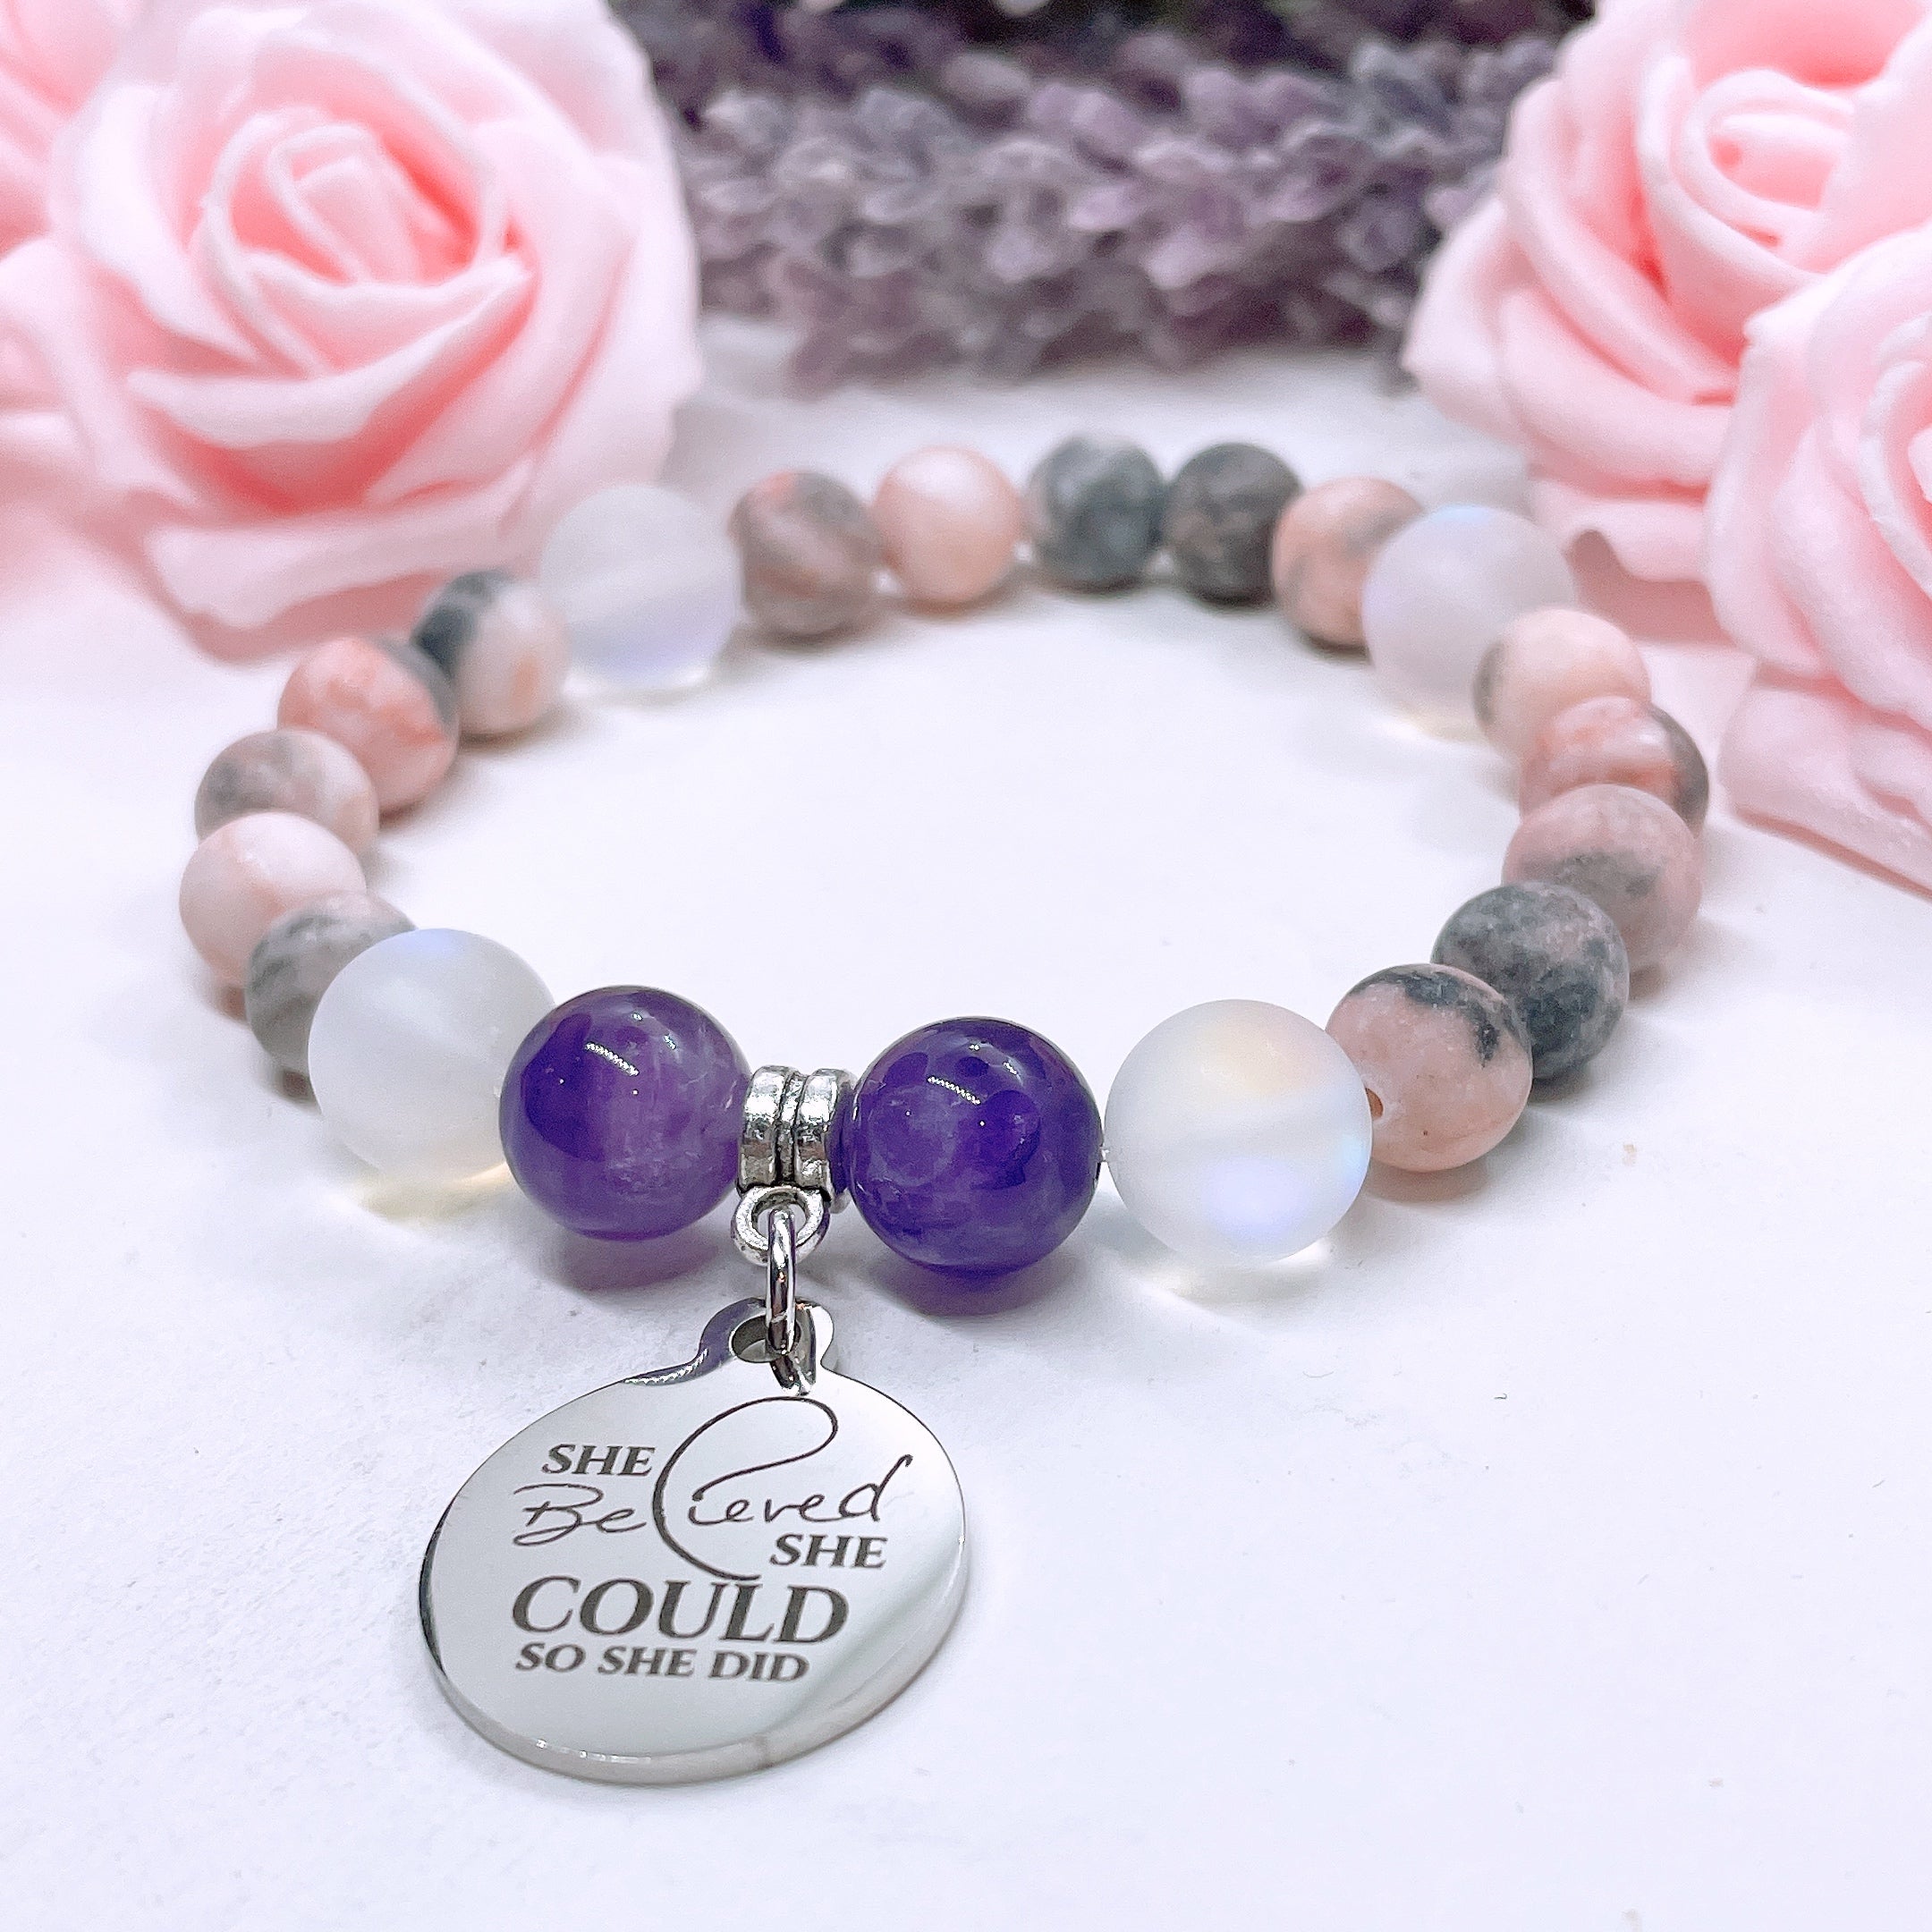 She Believed she Could so She Did Charm Bracelet